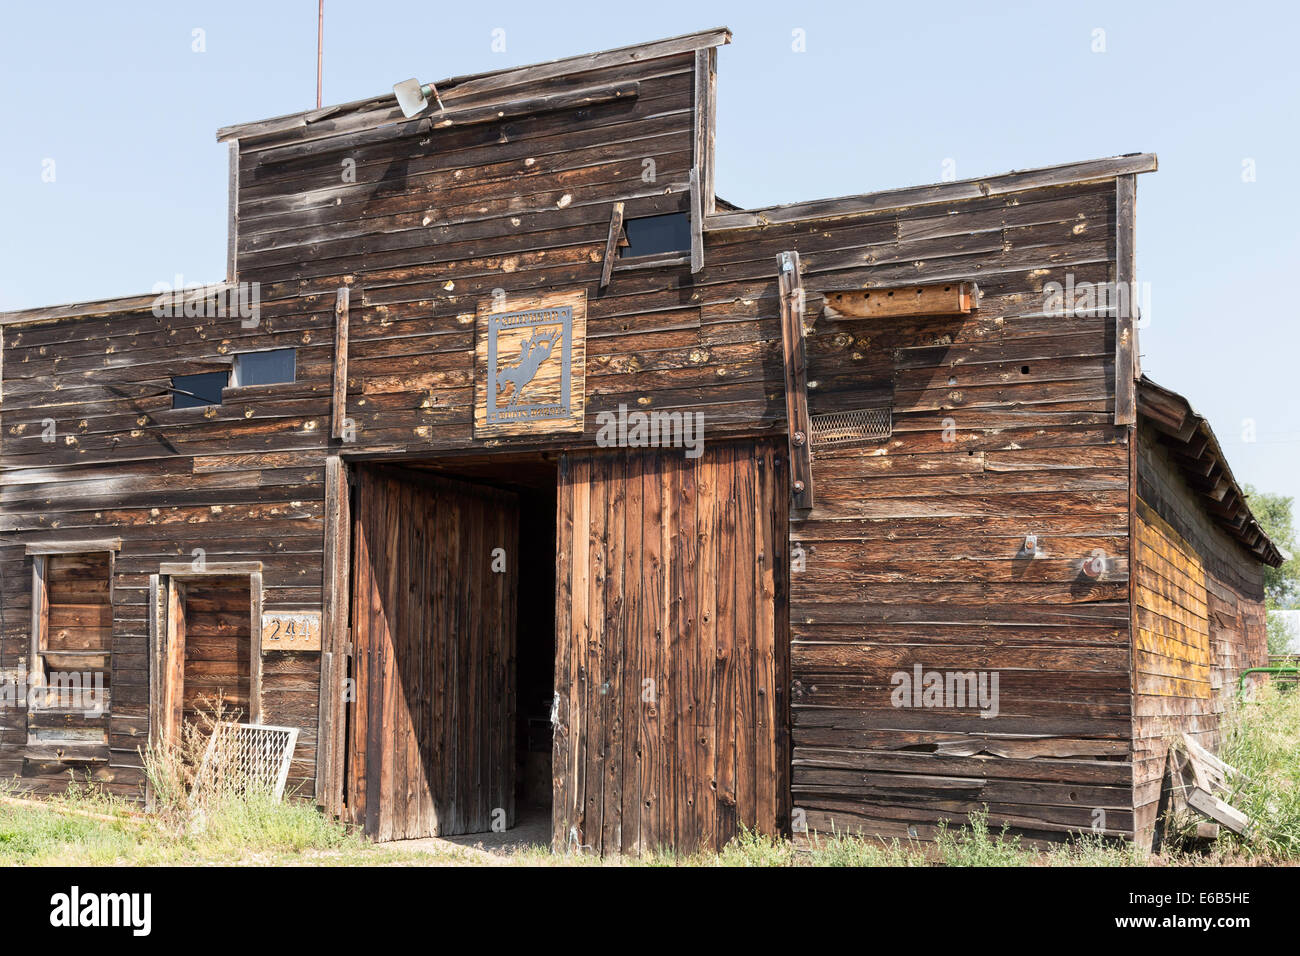 Dilapidated Wooden Structure Stock Photo